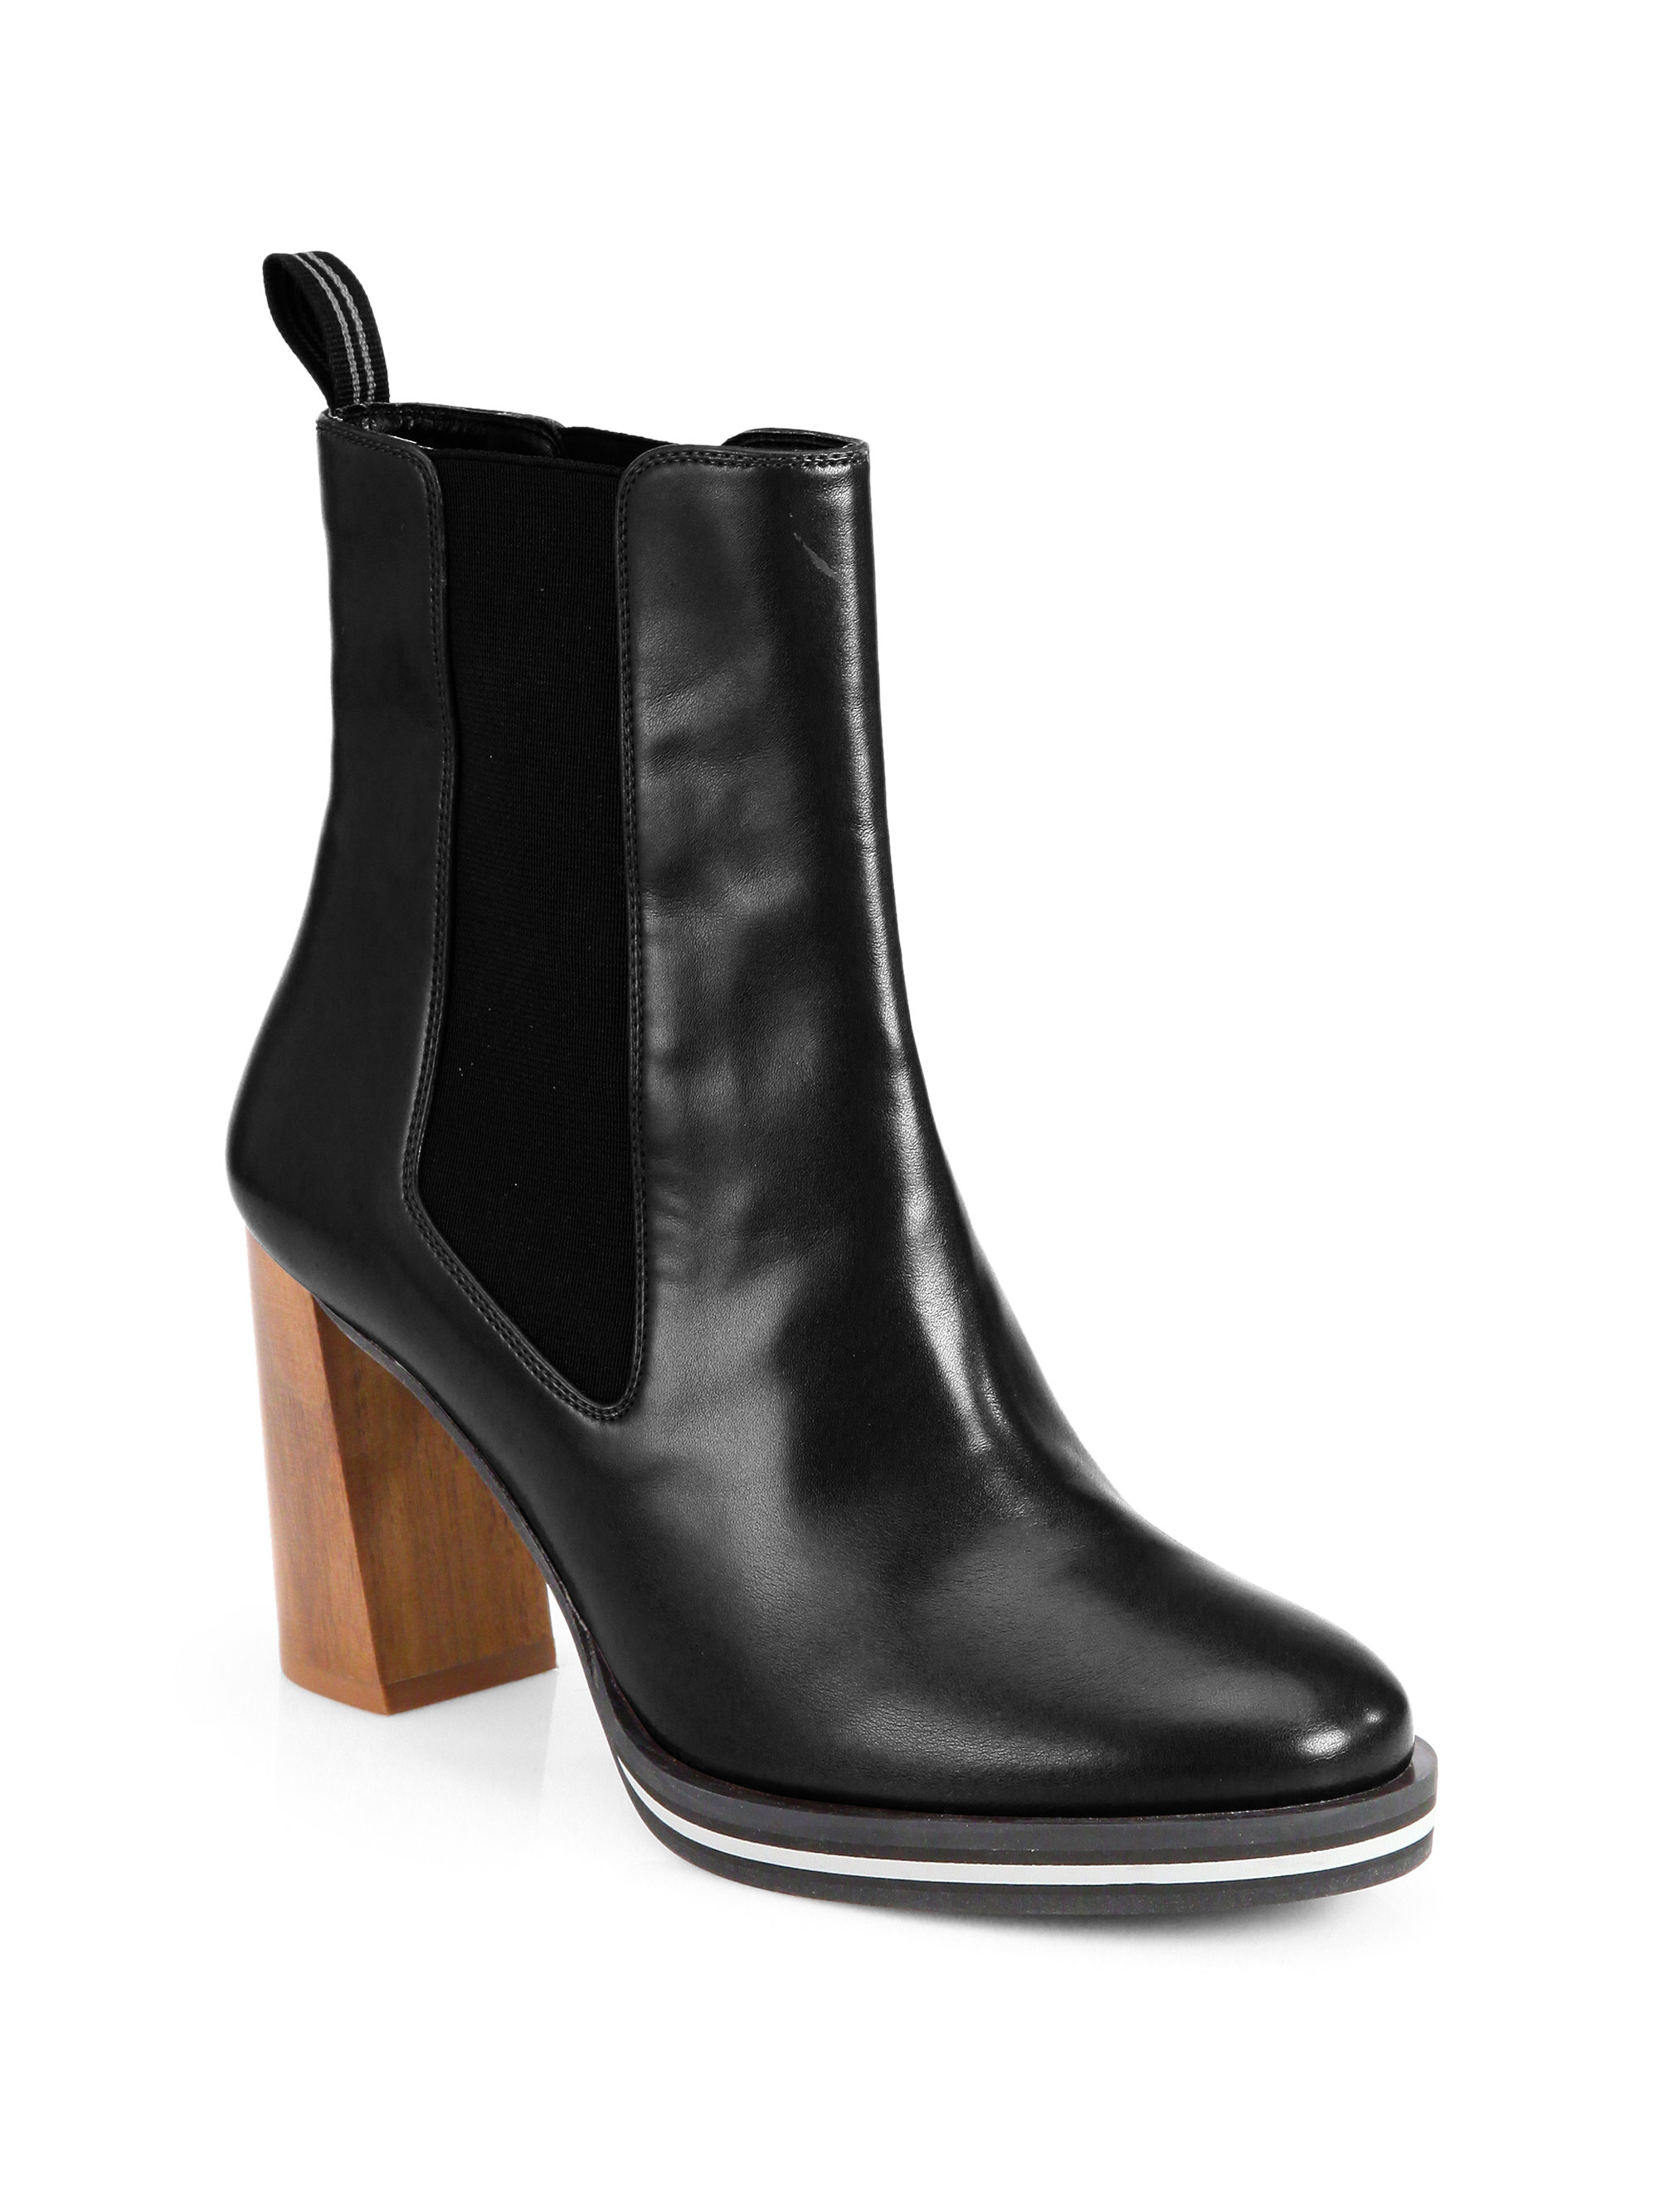 Lyst - Stella Mccartney Pull-On Faux Leather Ankle Boots in Black